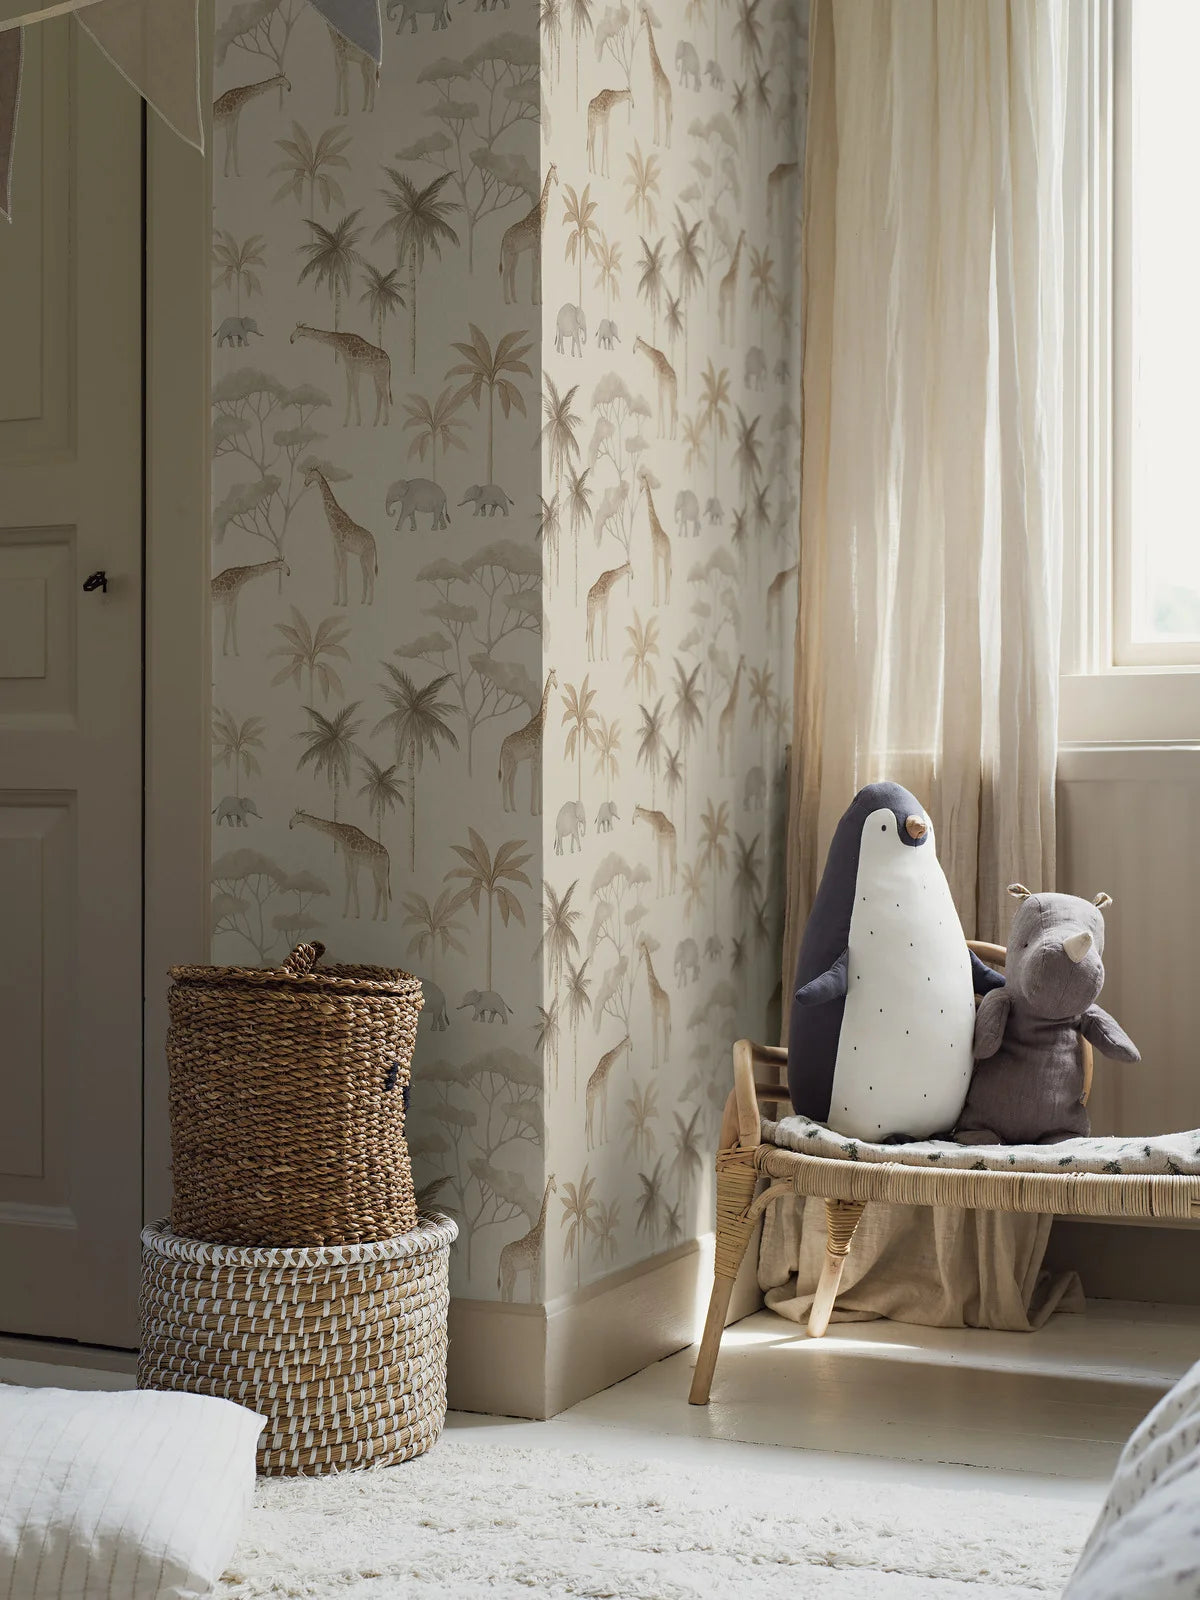 Our Savannah children’s wallpaper in natural tones of light linen, soft grey and golden beige on a sand-colored background